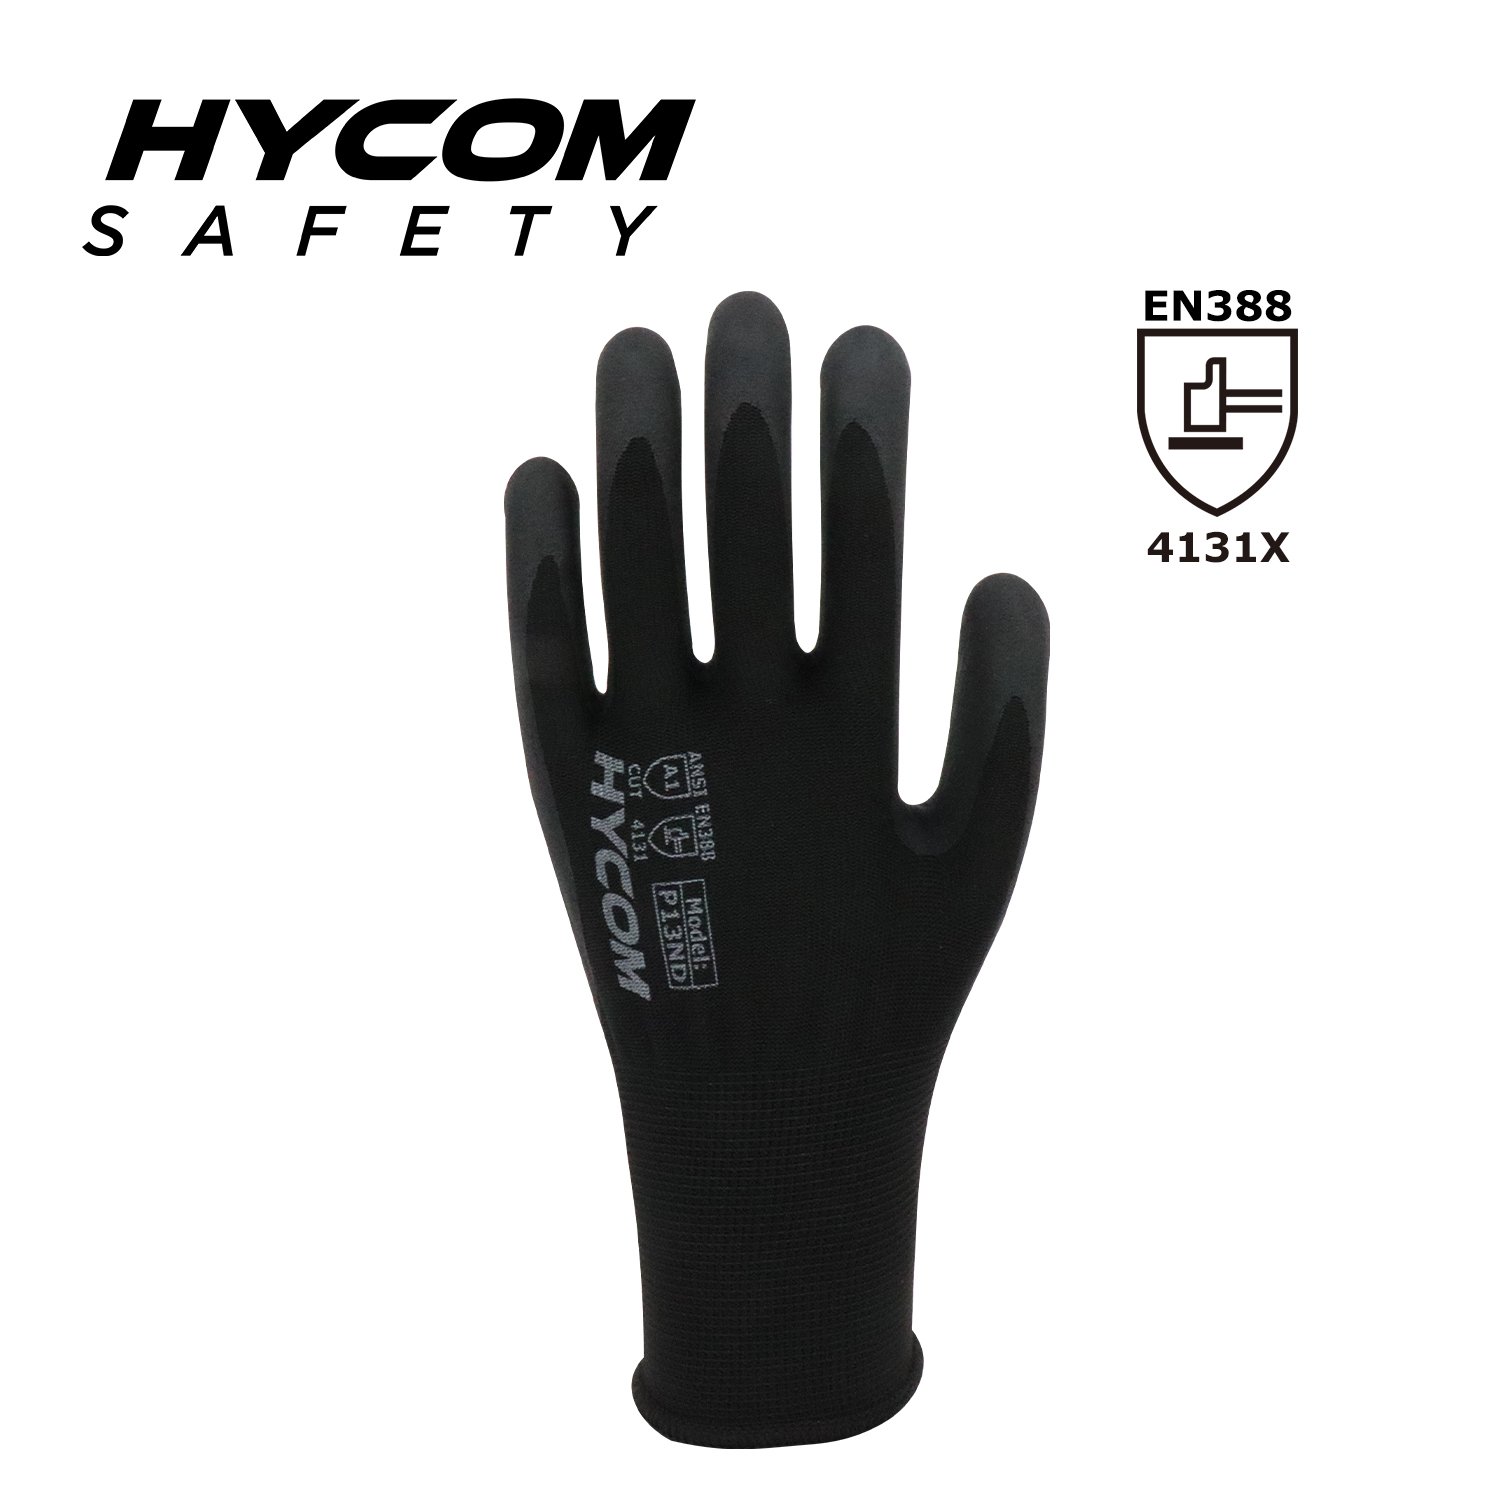 HYCOM 13G Polyester Glove with Palm Sandy Nitrile Coating Plus Nitrile Dotts Work Gloves